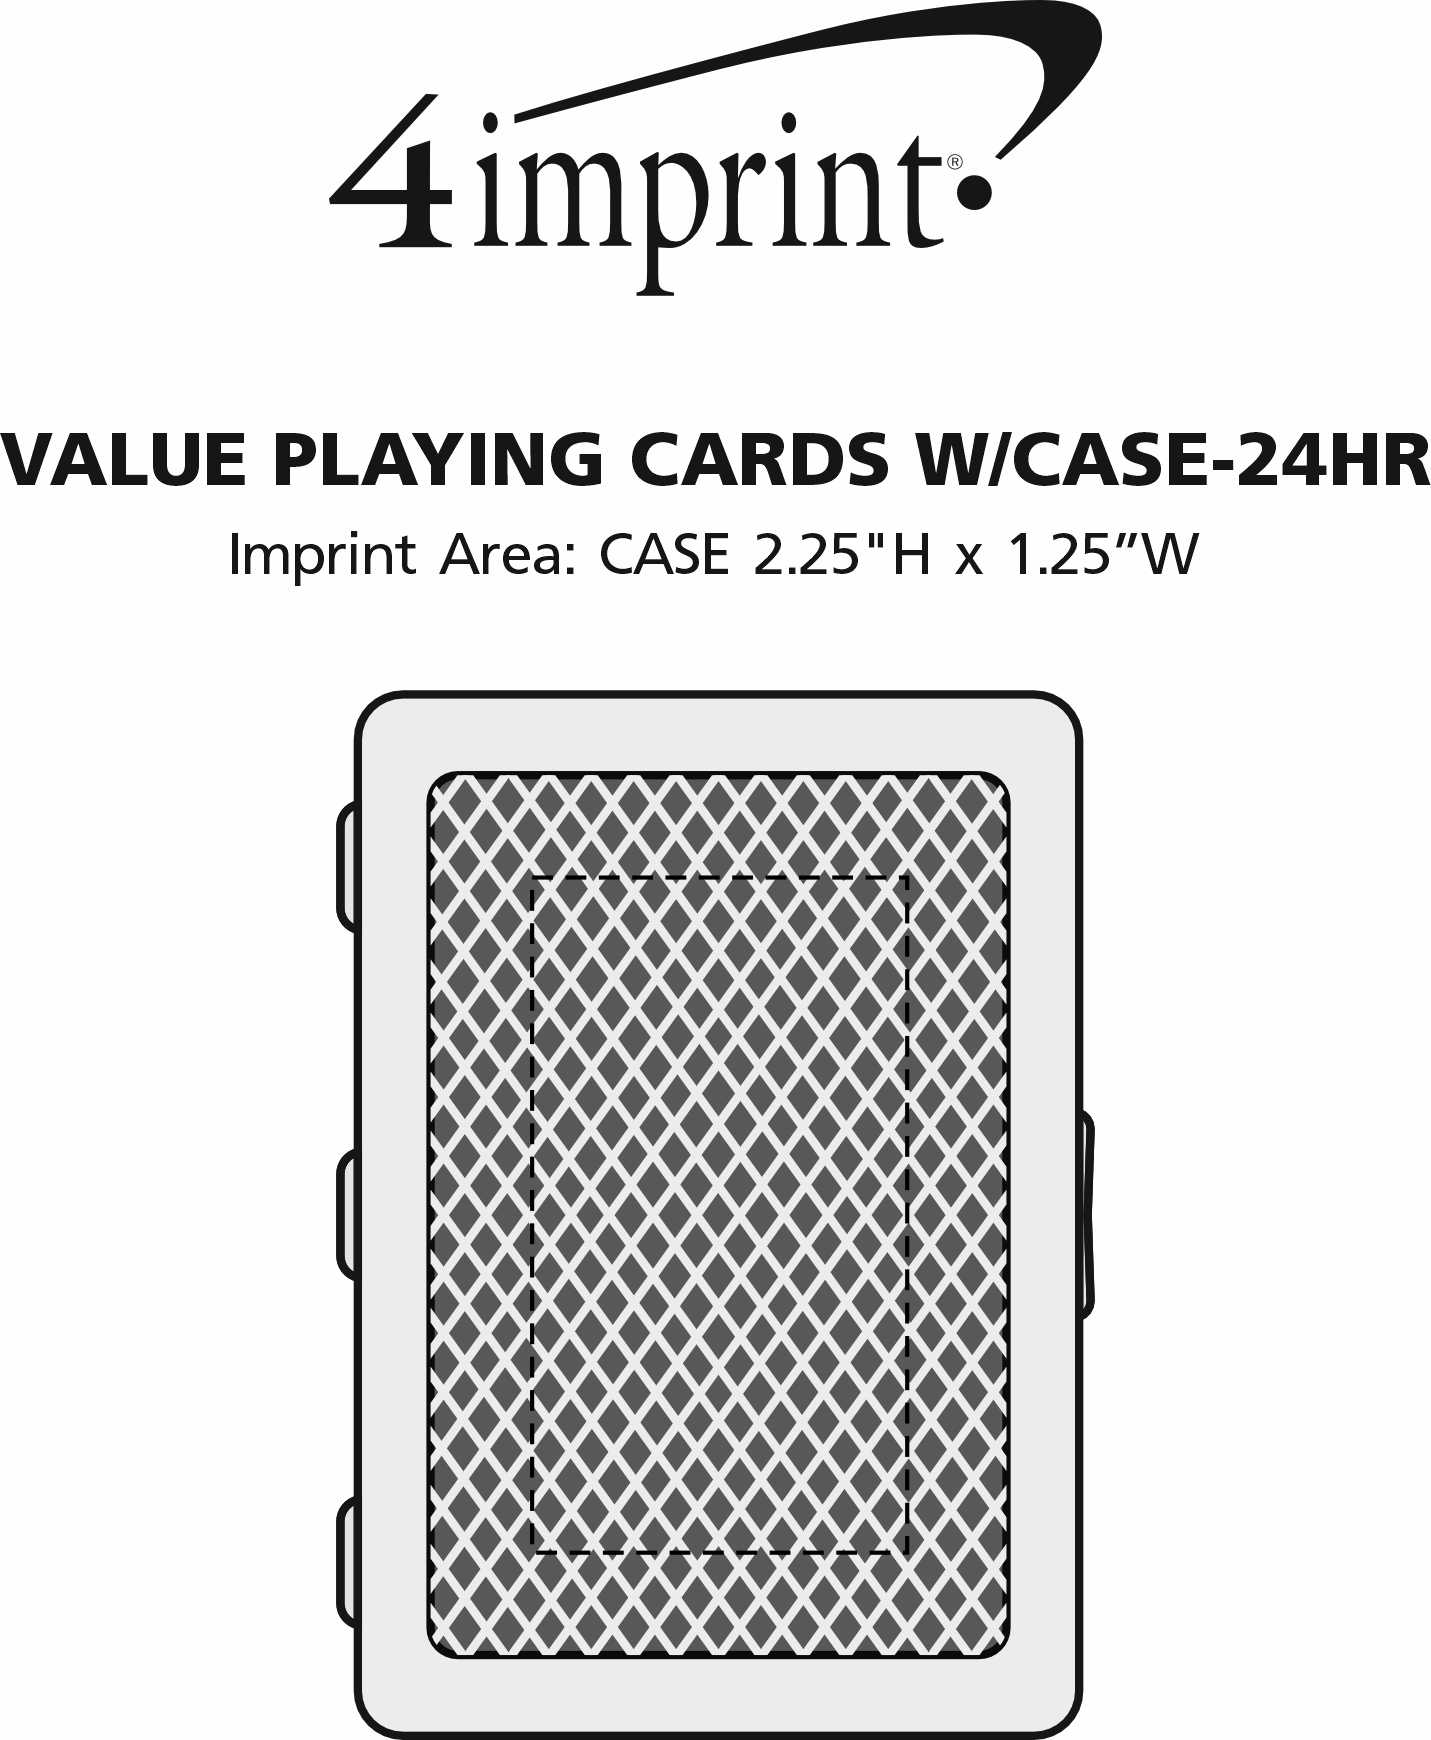 Imprint Area of Value Playing Cards with Case - 24 hr